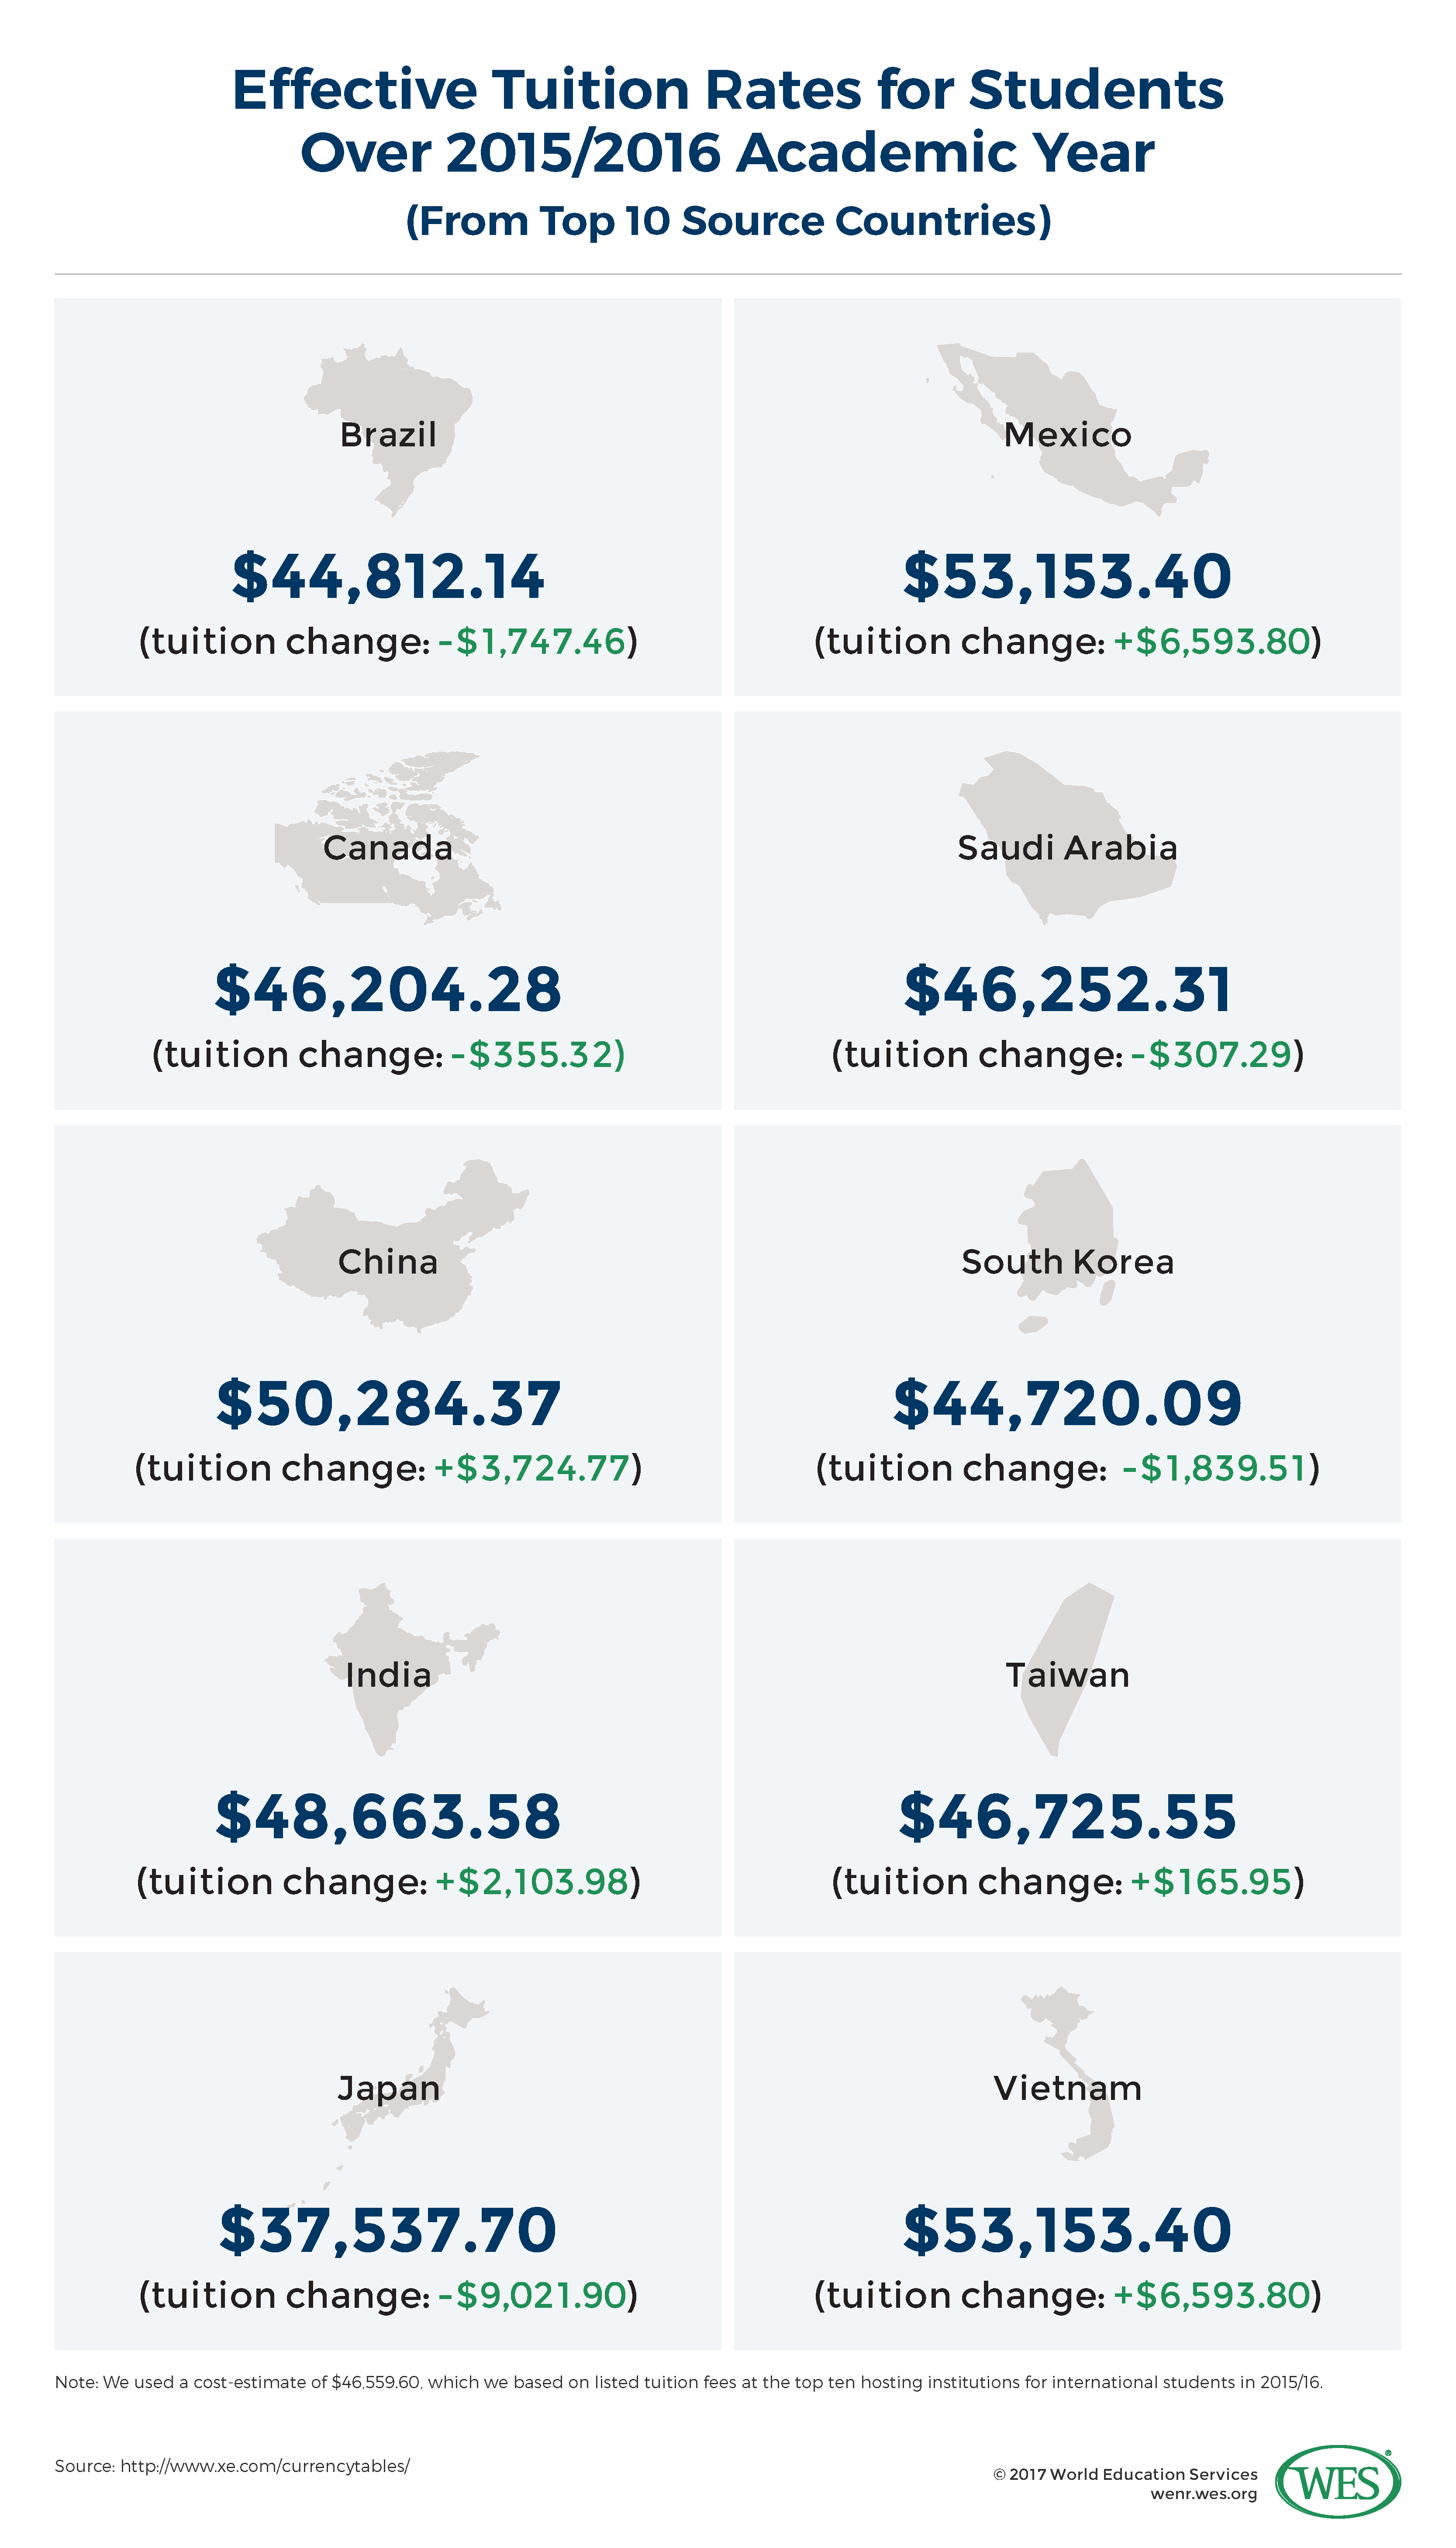 An infographic with the effective tuition rates for international students in the U.S. from the top 10 source countries over the 2015/16 academic year. 